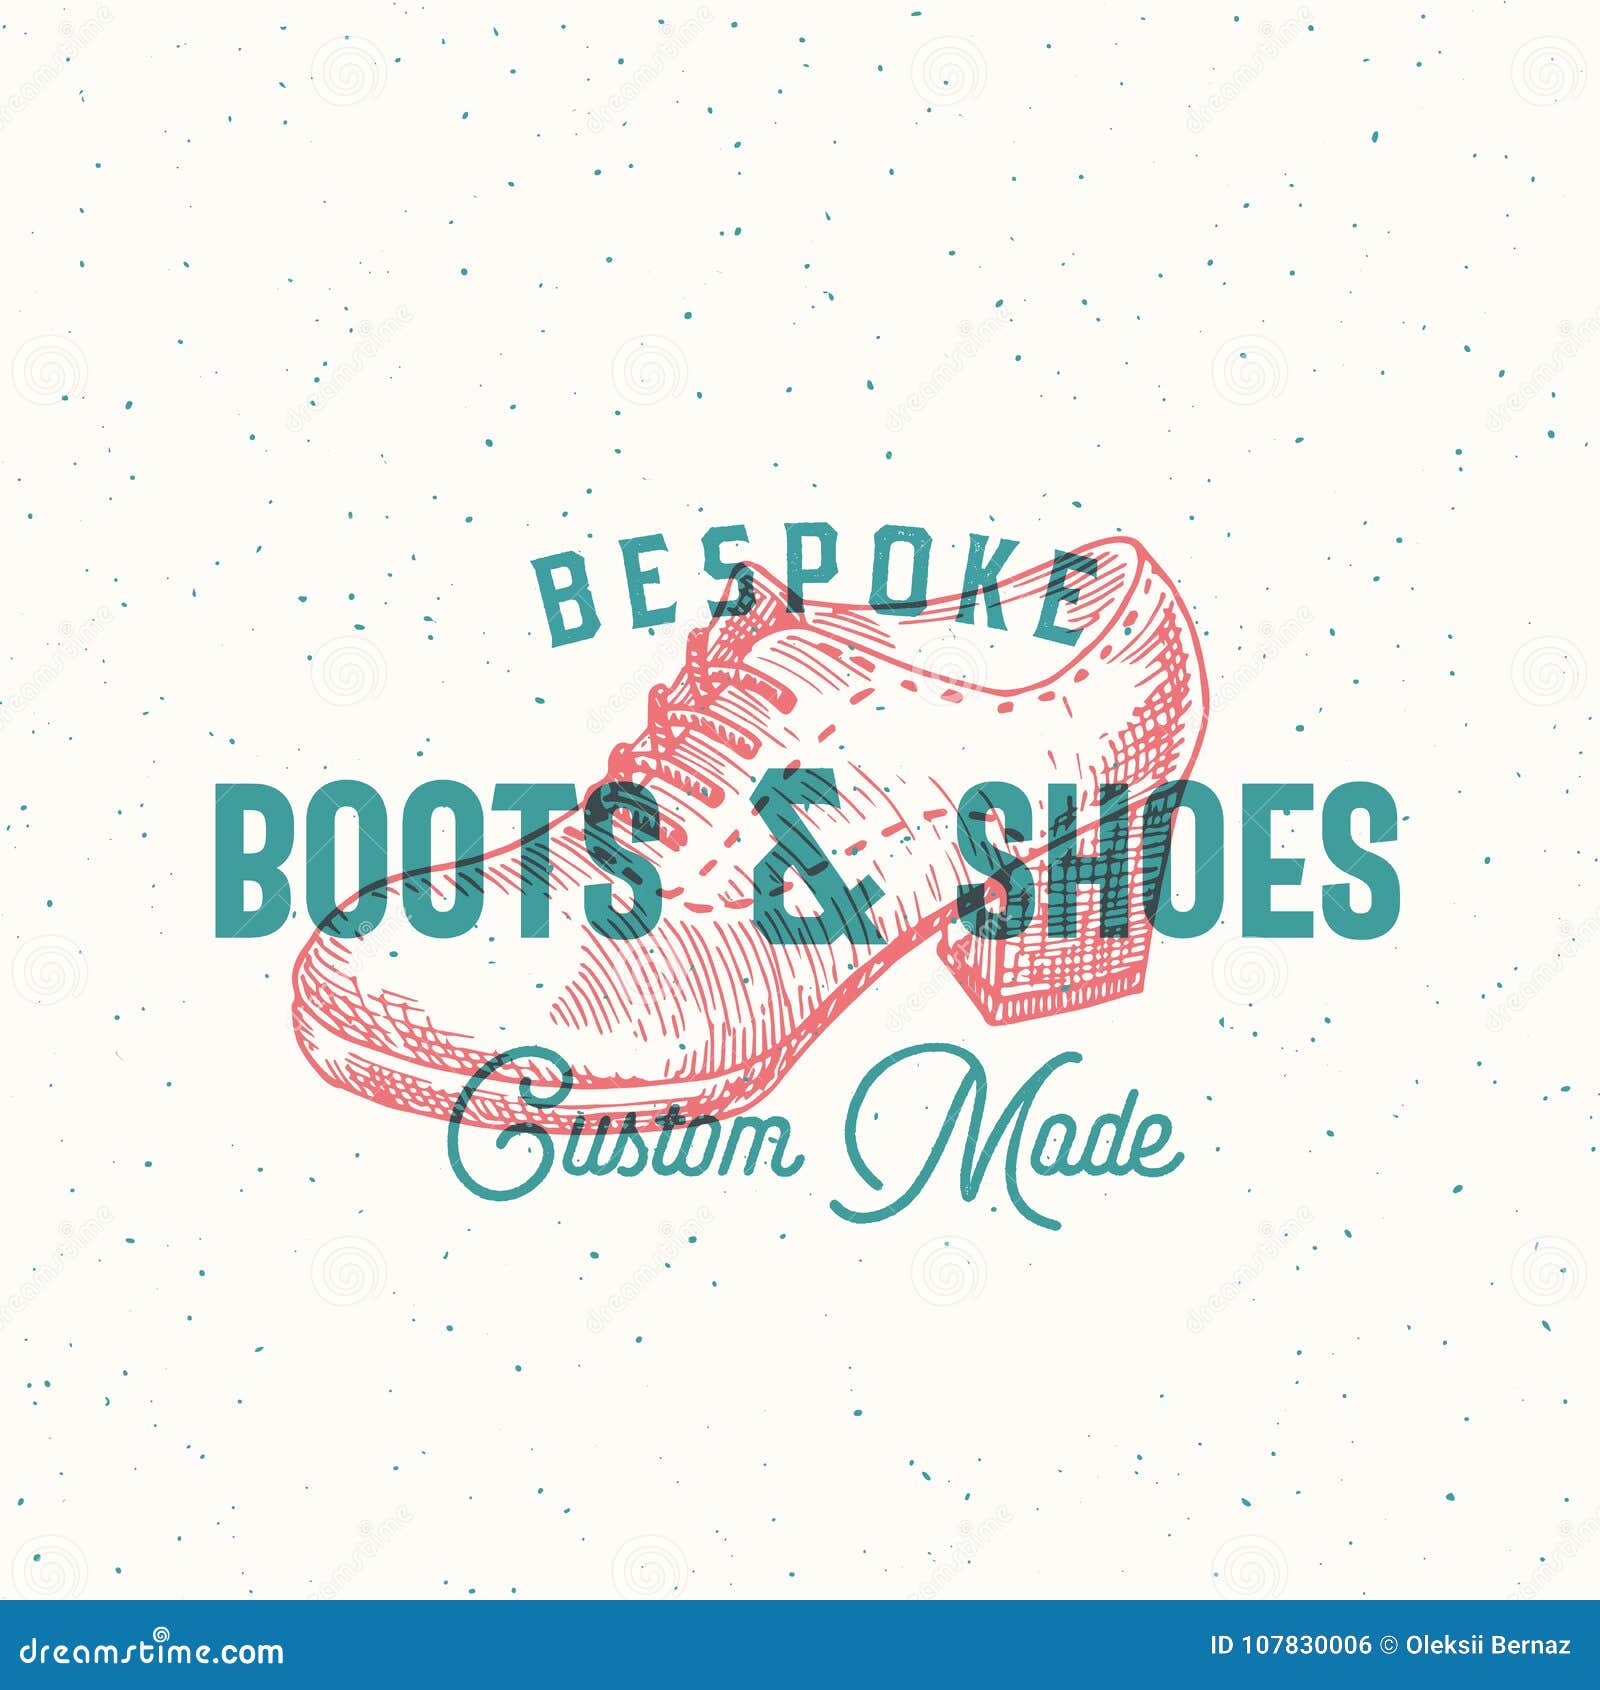 bespoke boots and shoes retro  sign,  or logo template. women shoe  and vintage typography